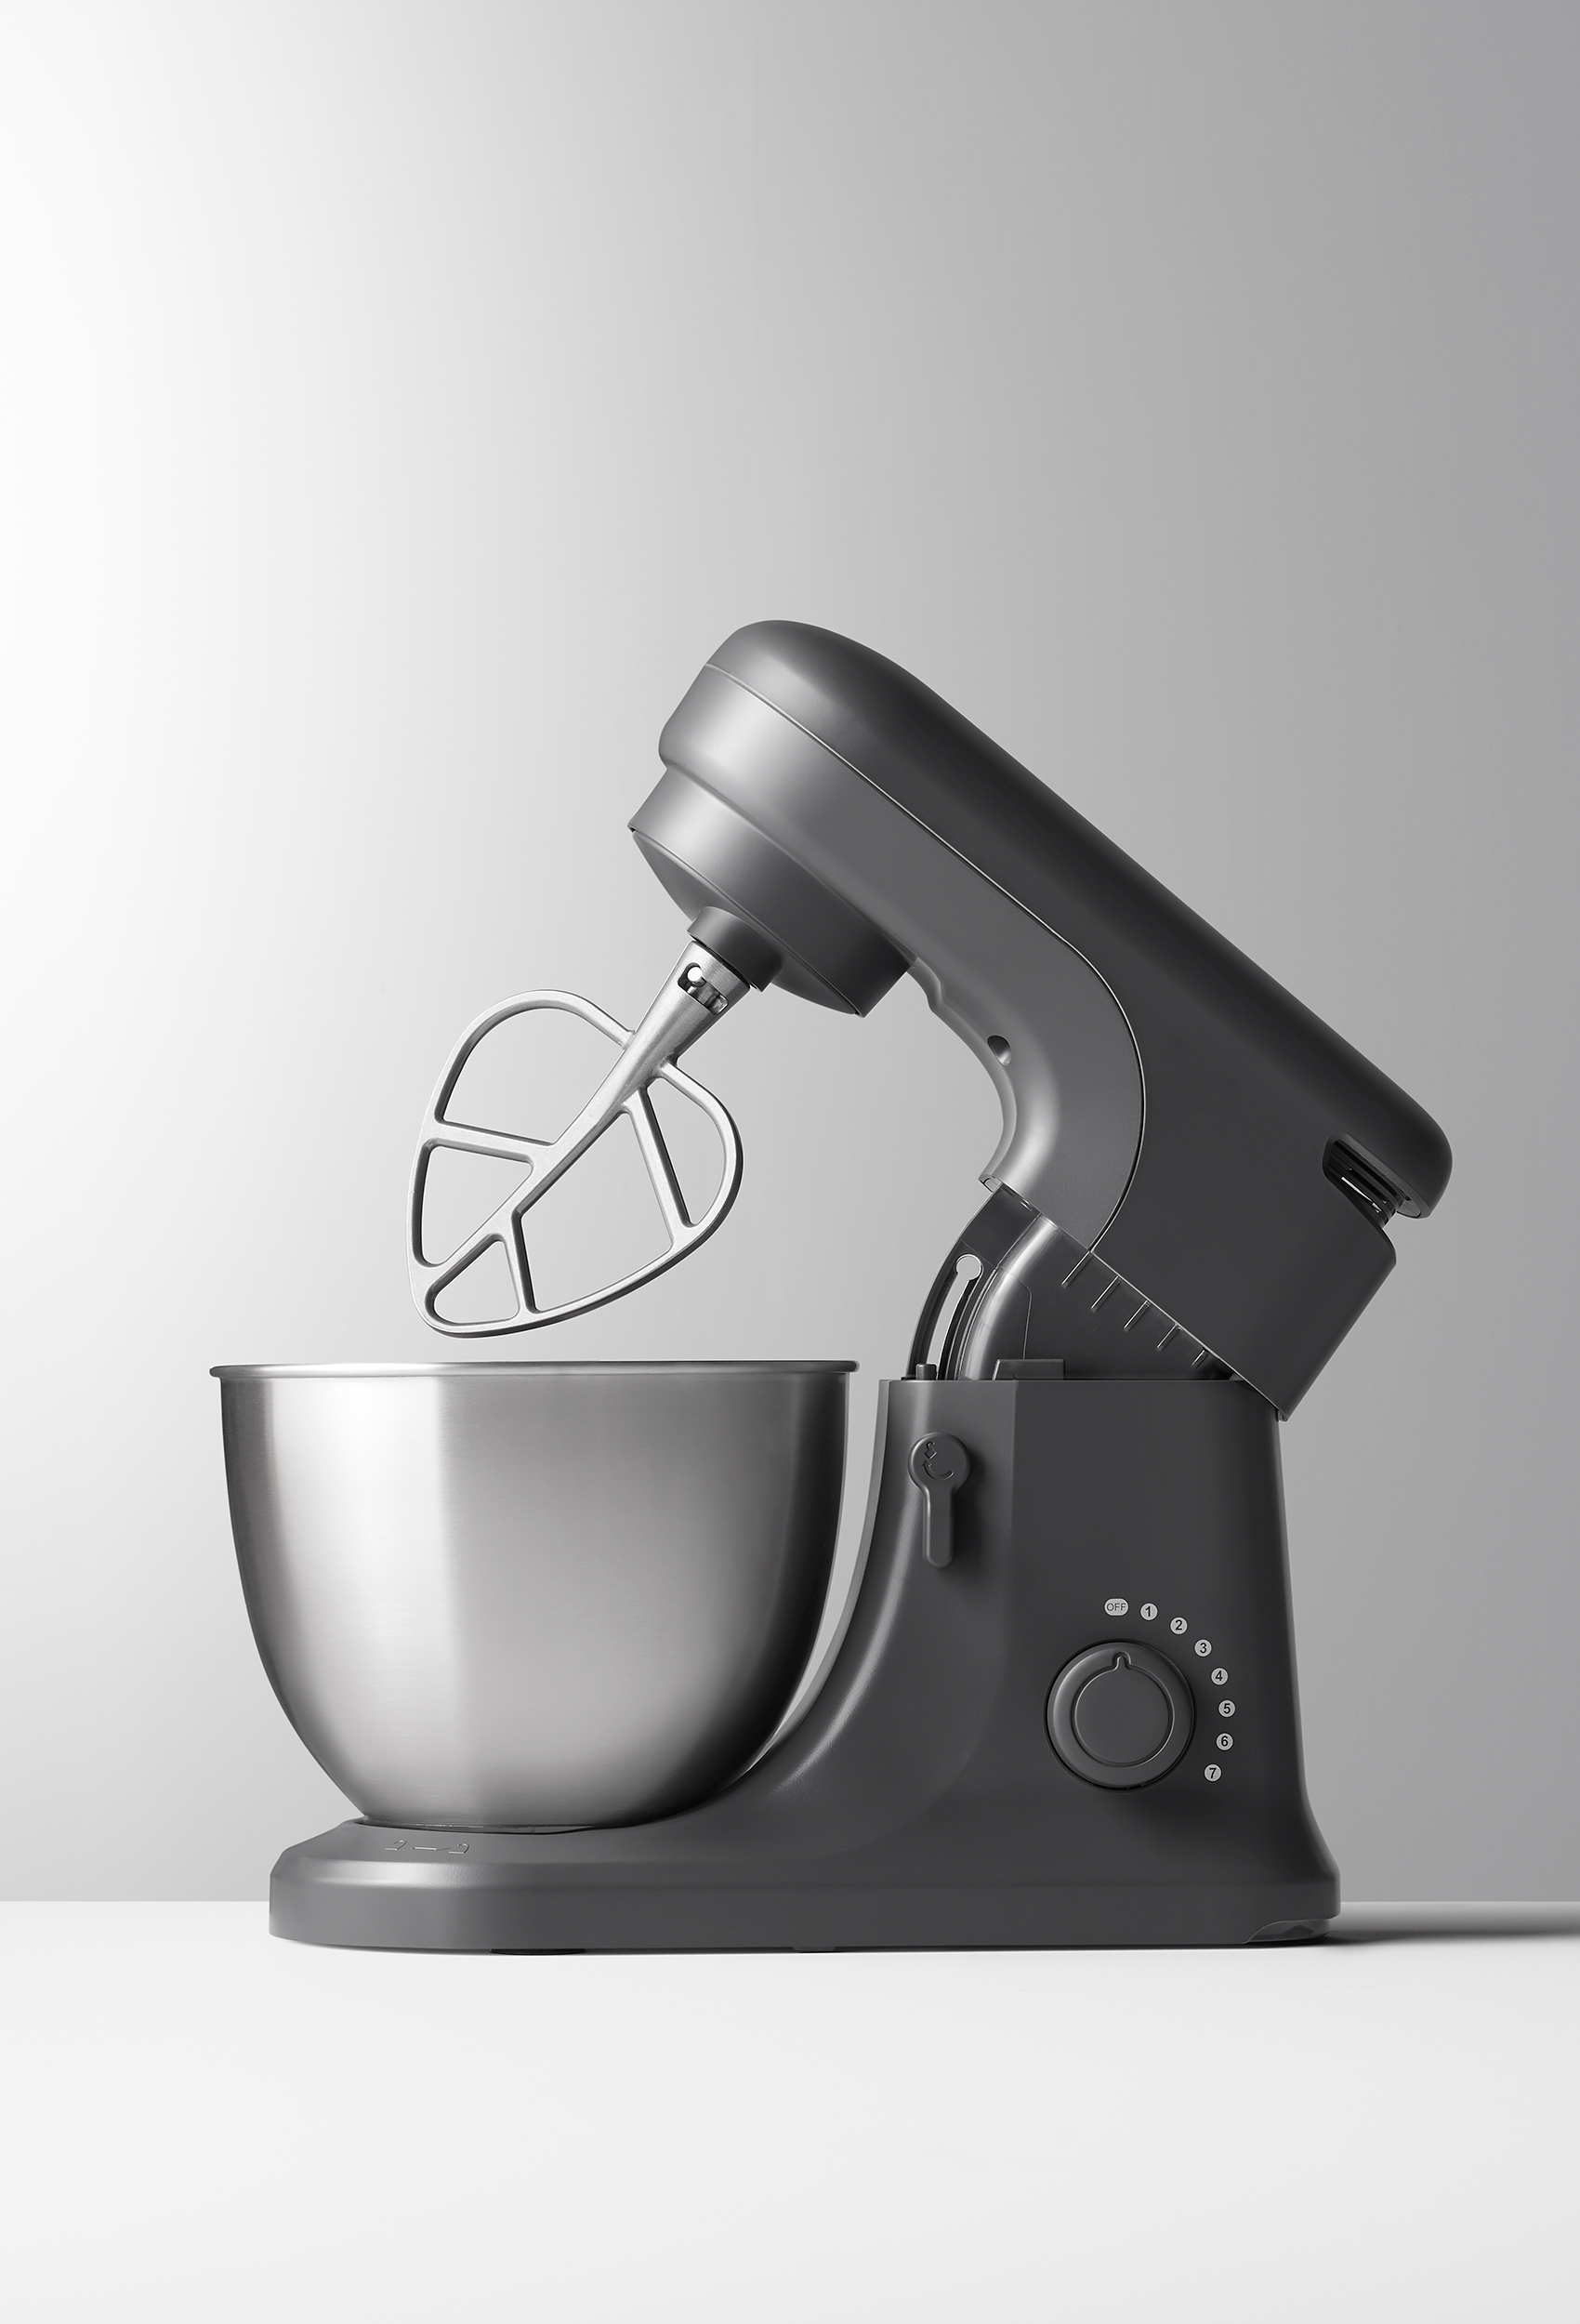 2018_07_27_Stand-Mixer_back